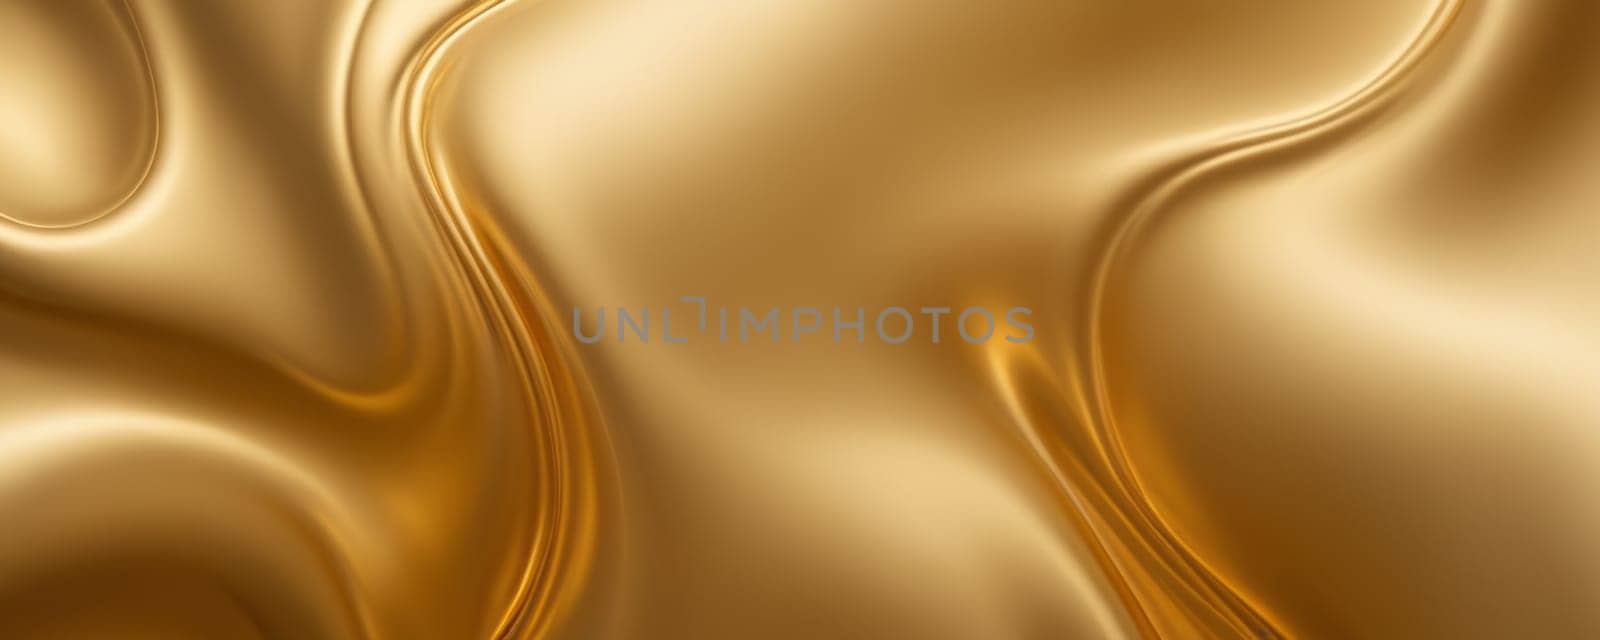 A smooth and flowing golden texture on a light background. The texture resembles liquid gold or silk fabric, with various shades of gold creating a soft and elegant look. The curves and swirls in the design give it a dynamic and fluid appearance. There are highlights and shadows that add depth to the image, making it appear three-dimensional. The image has a luxurious and rich quality. Generative AI